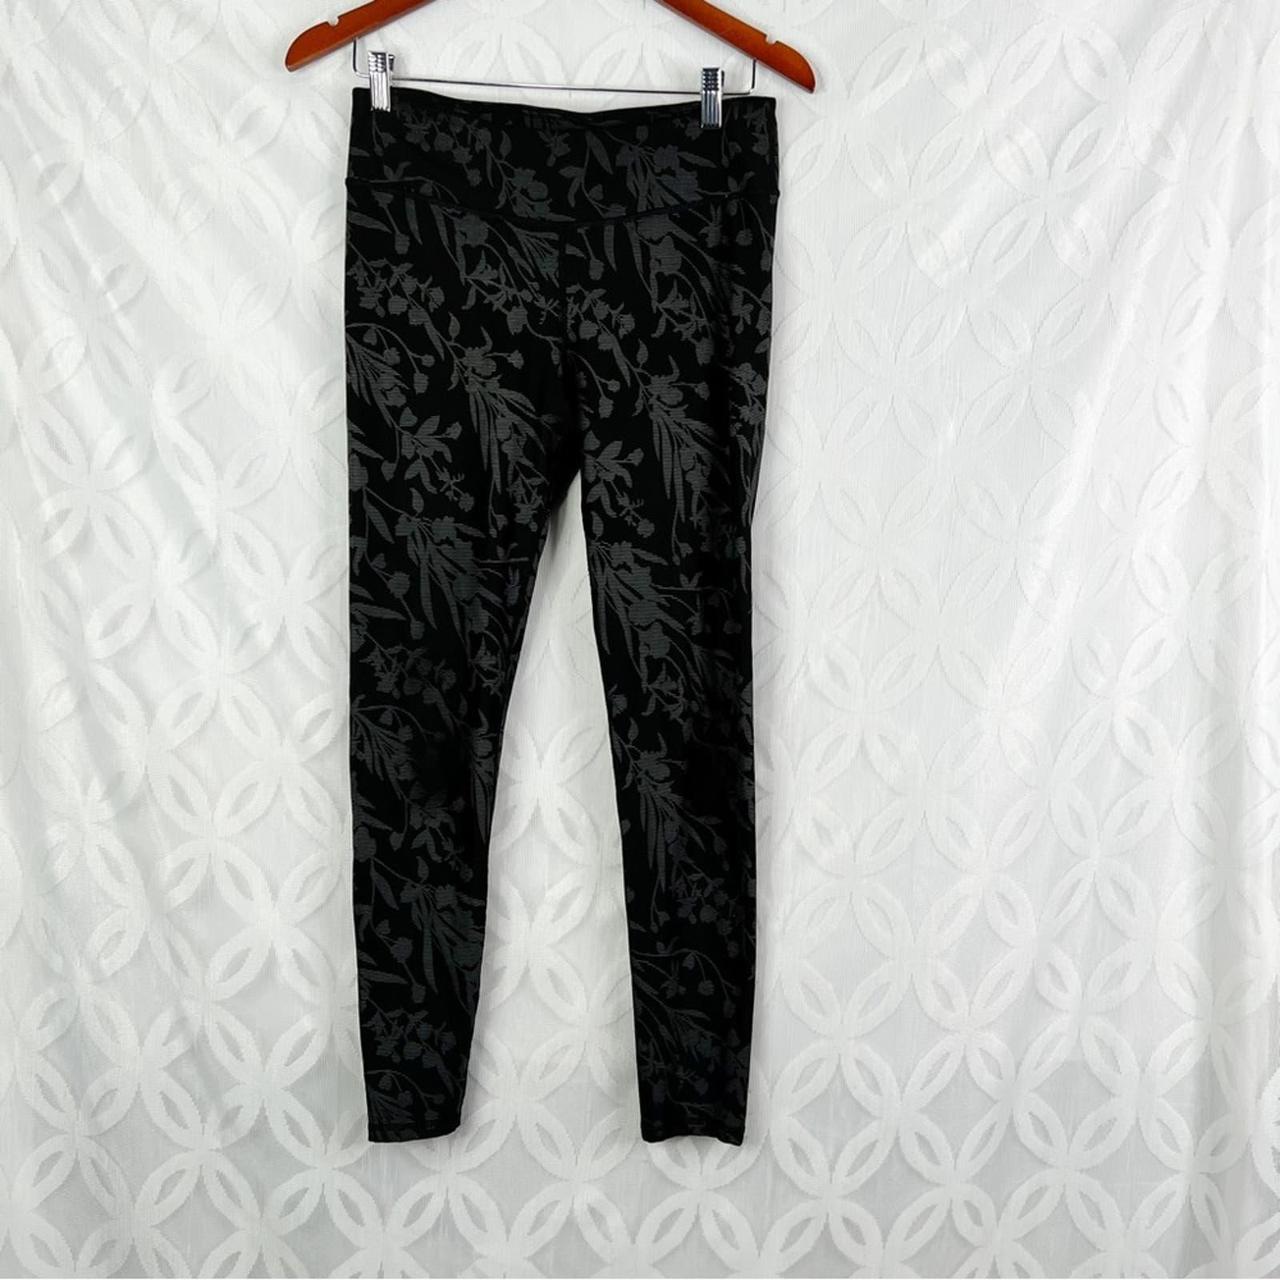 Motion365+ High-Waisted Piped Legging